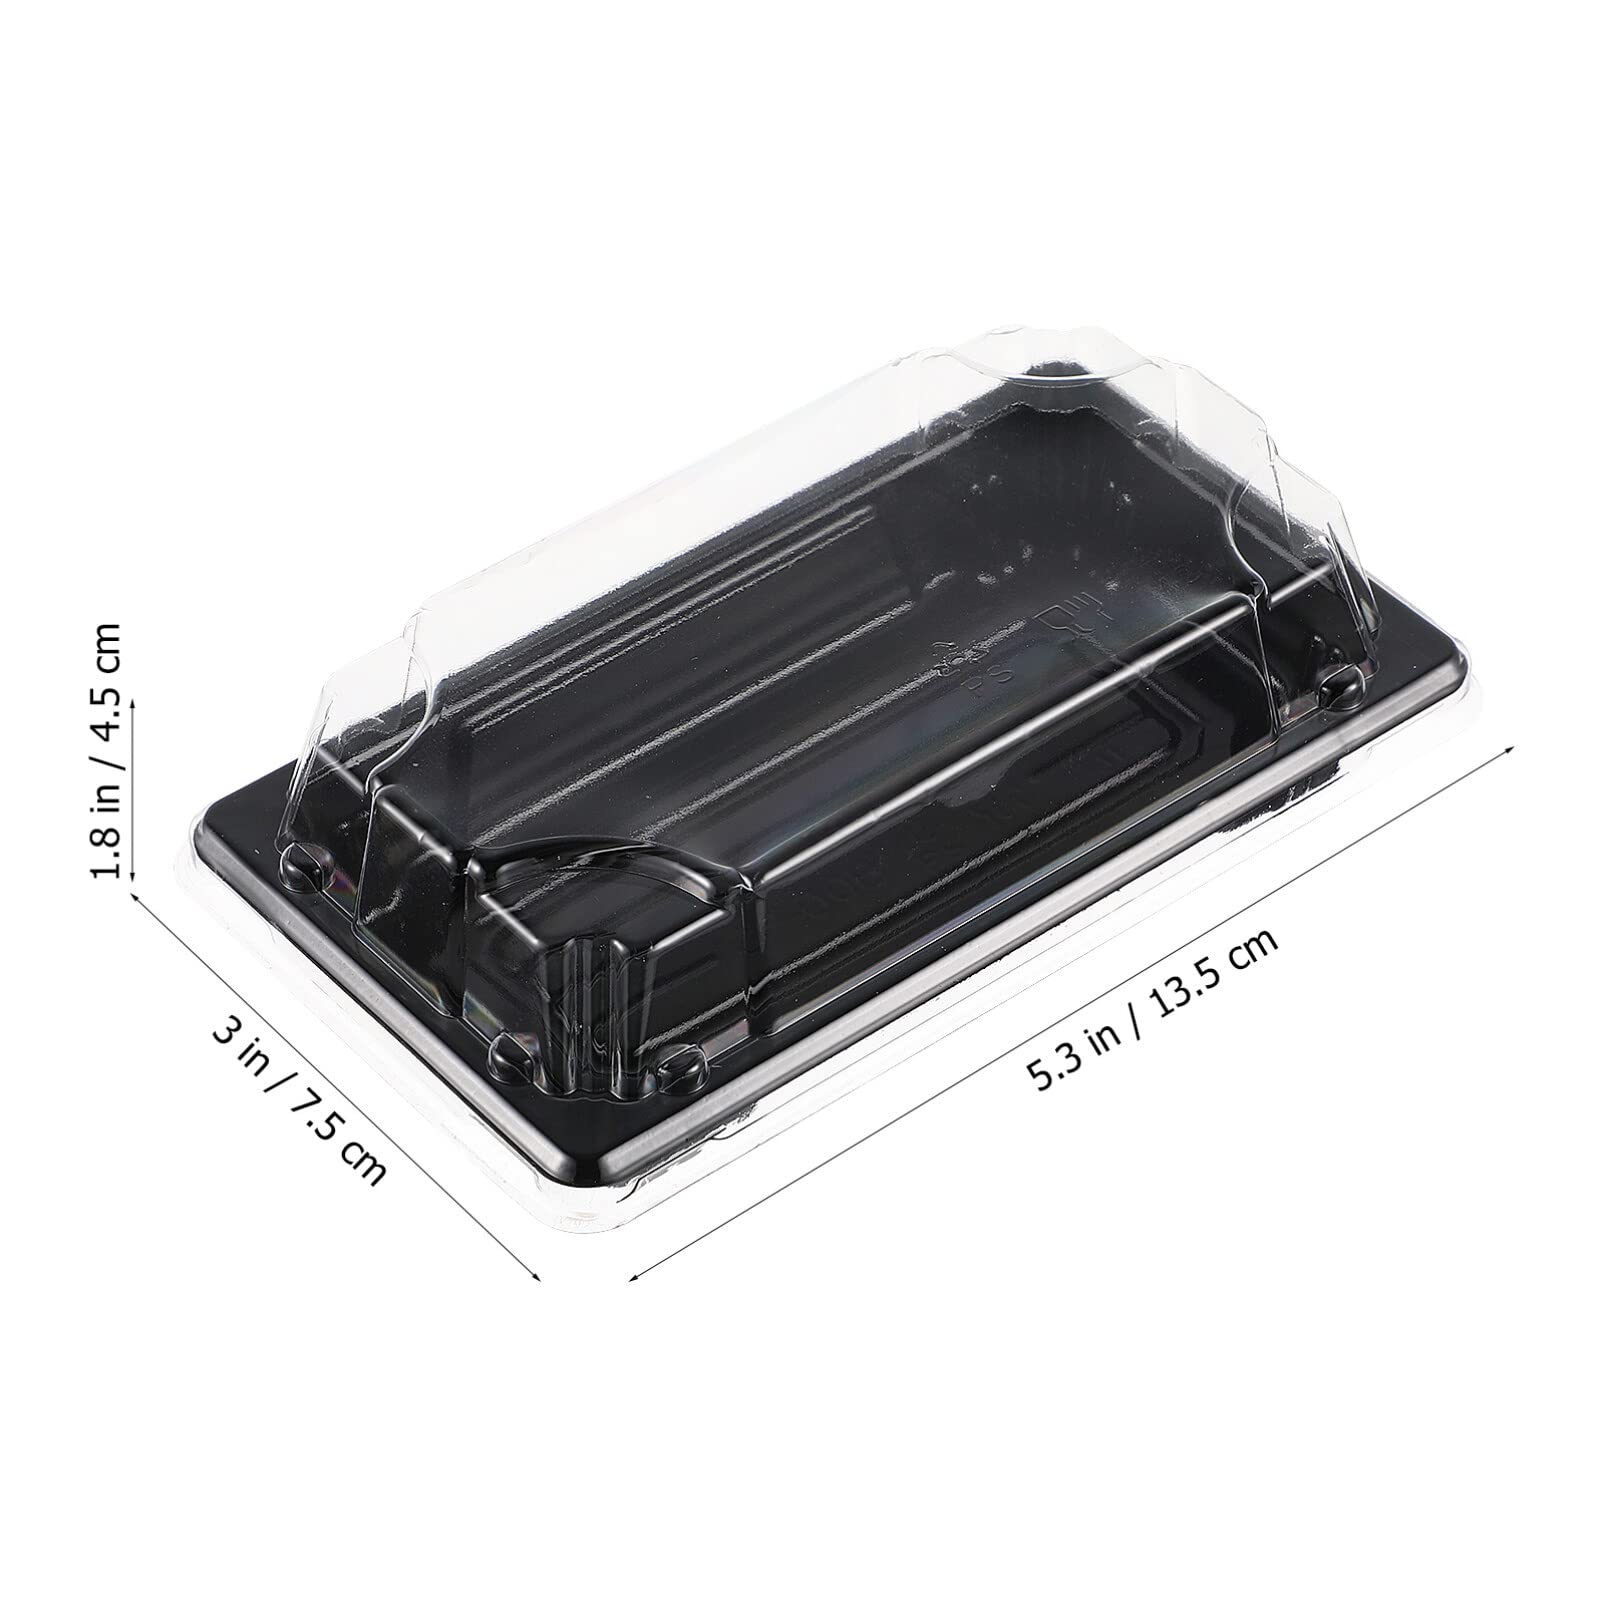 Sushi Containers with Lid: 100 Pcs Black Disposable Sushi Containers Sushi Boxes with Clear Lid Fruit Cake Dessert Container